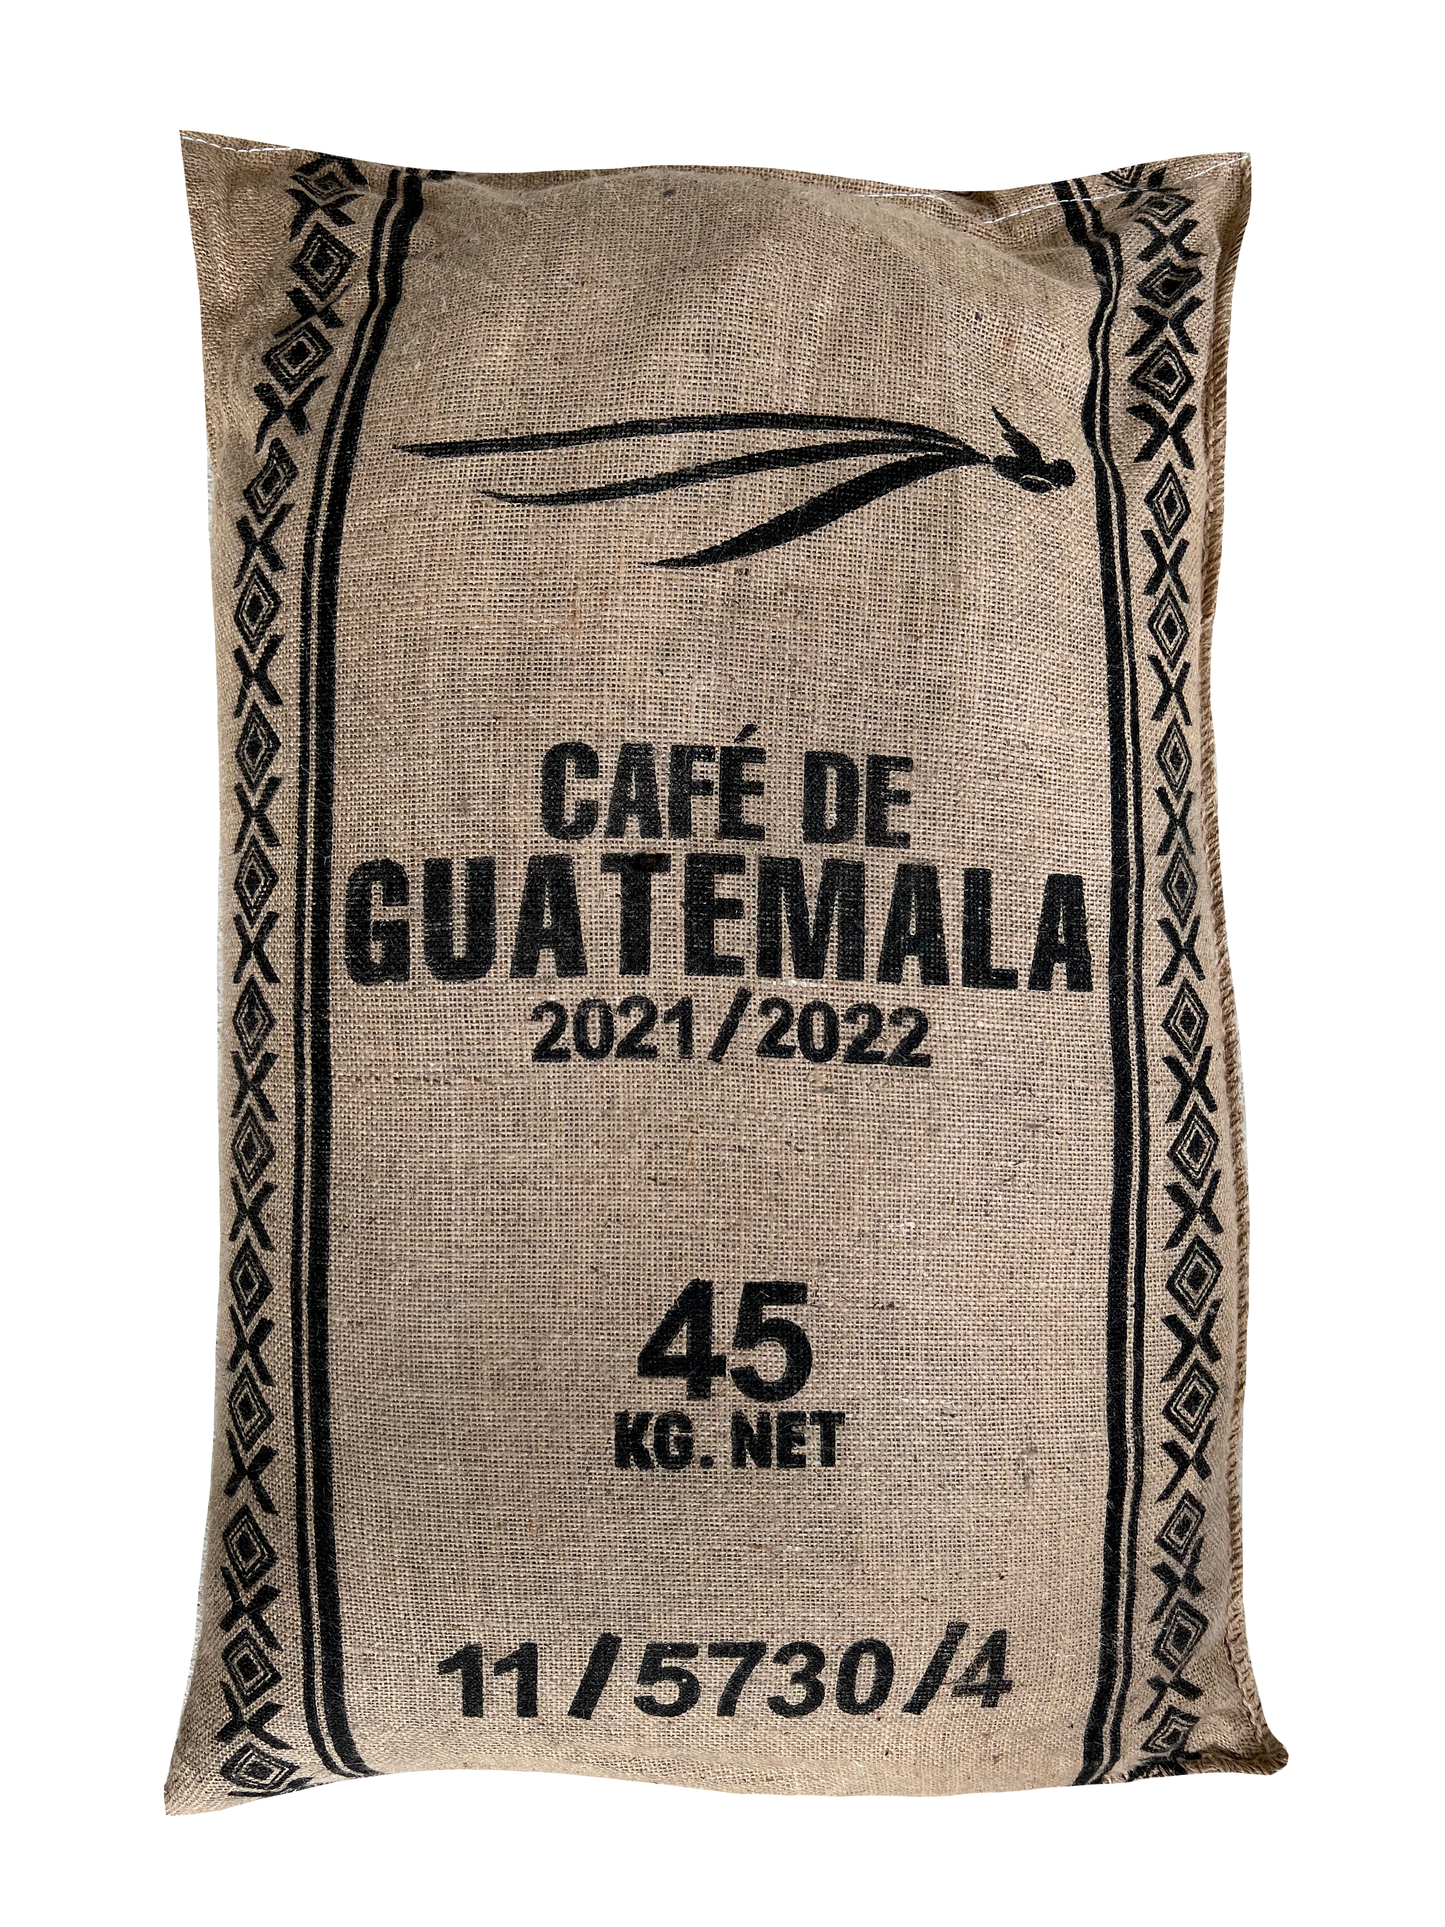 HB beans Guatemala Specialty unroasted Kafetos arabica coffee – Green